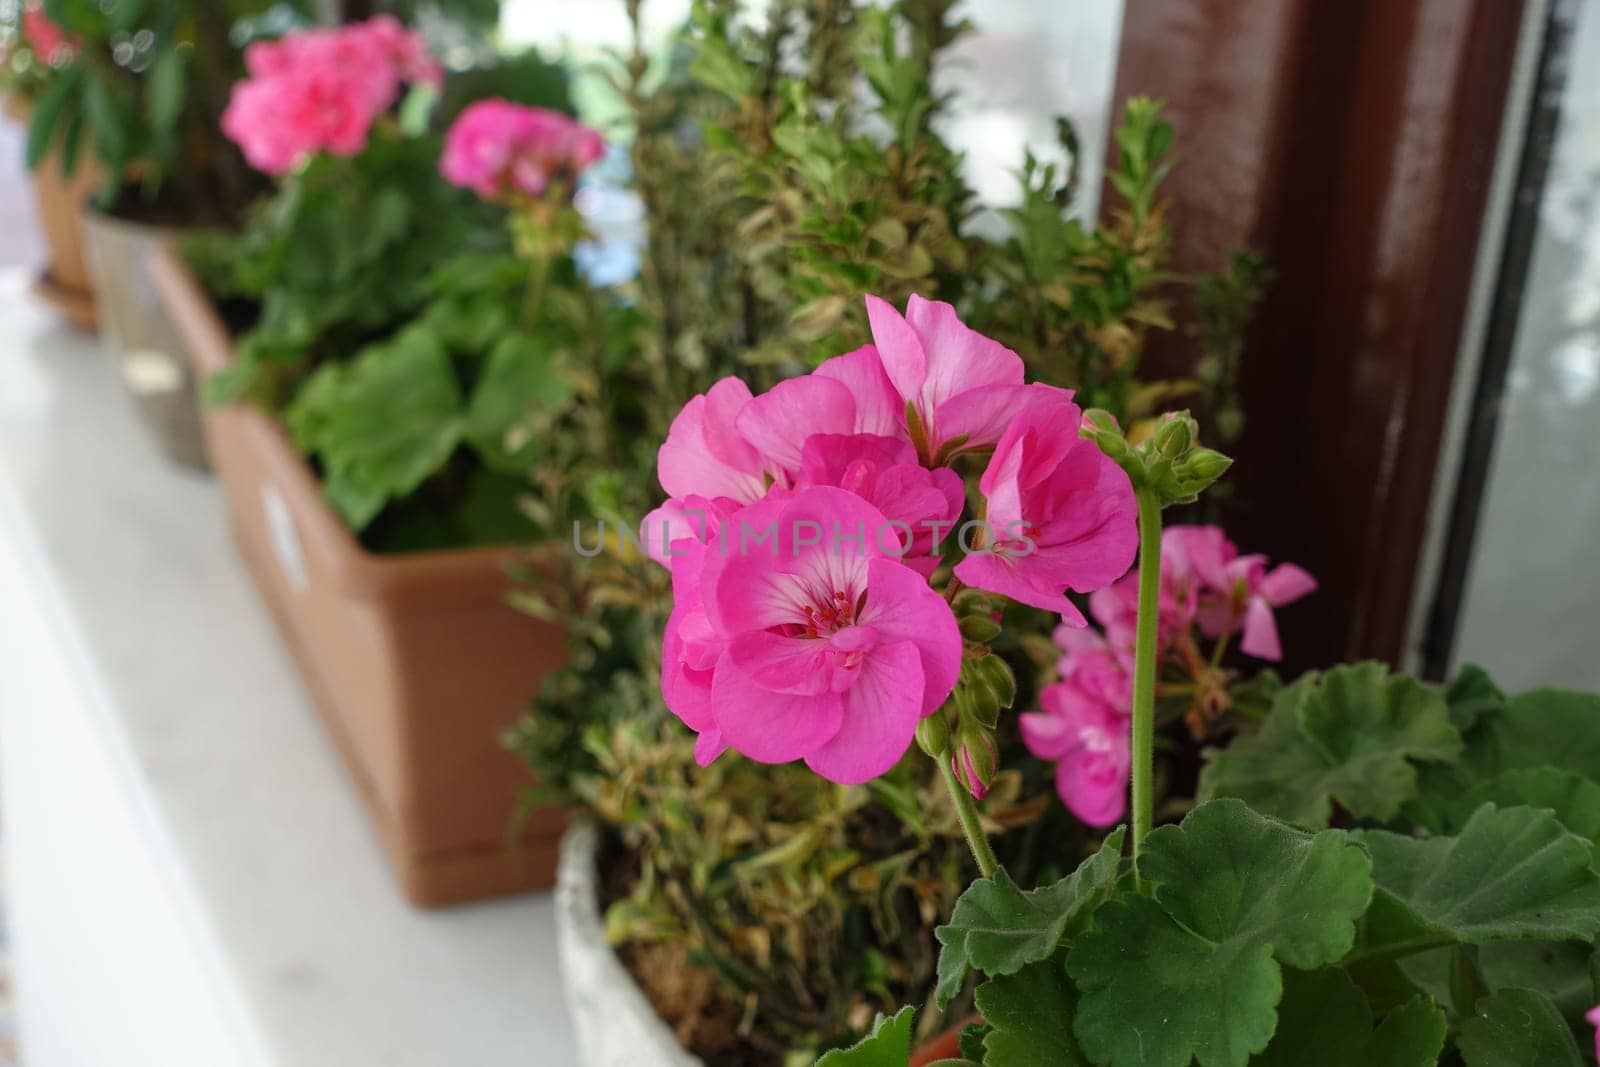 geranium flower in flower pot, pink and red blooming geranium plant, by nhatipoglu